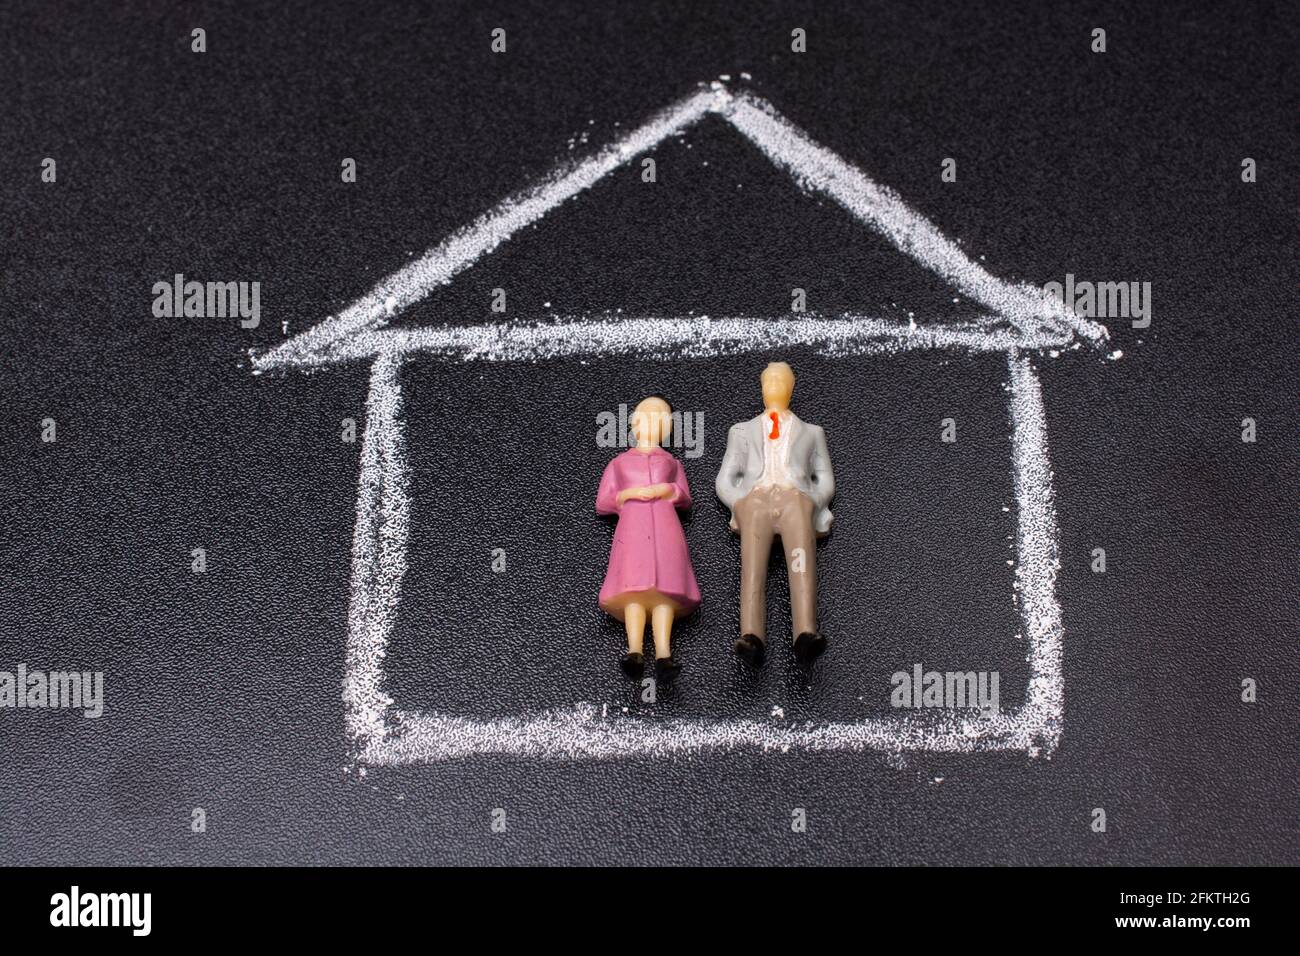 Concept offamily, real estate, purchase and sale of housing. Stock Photo